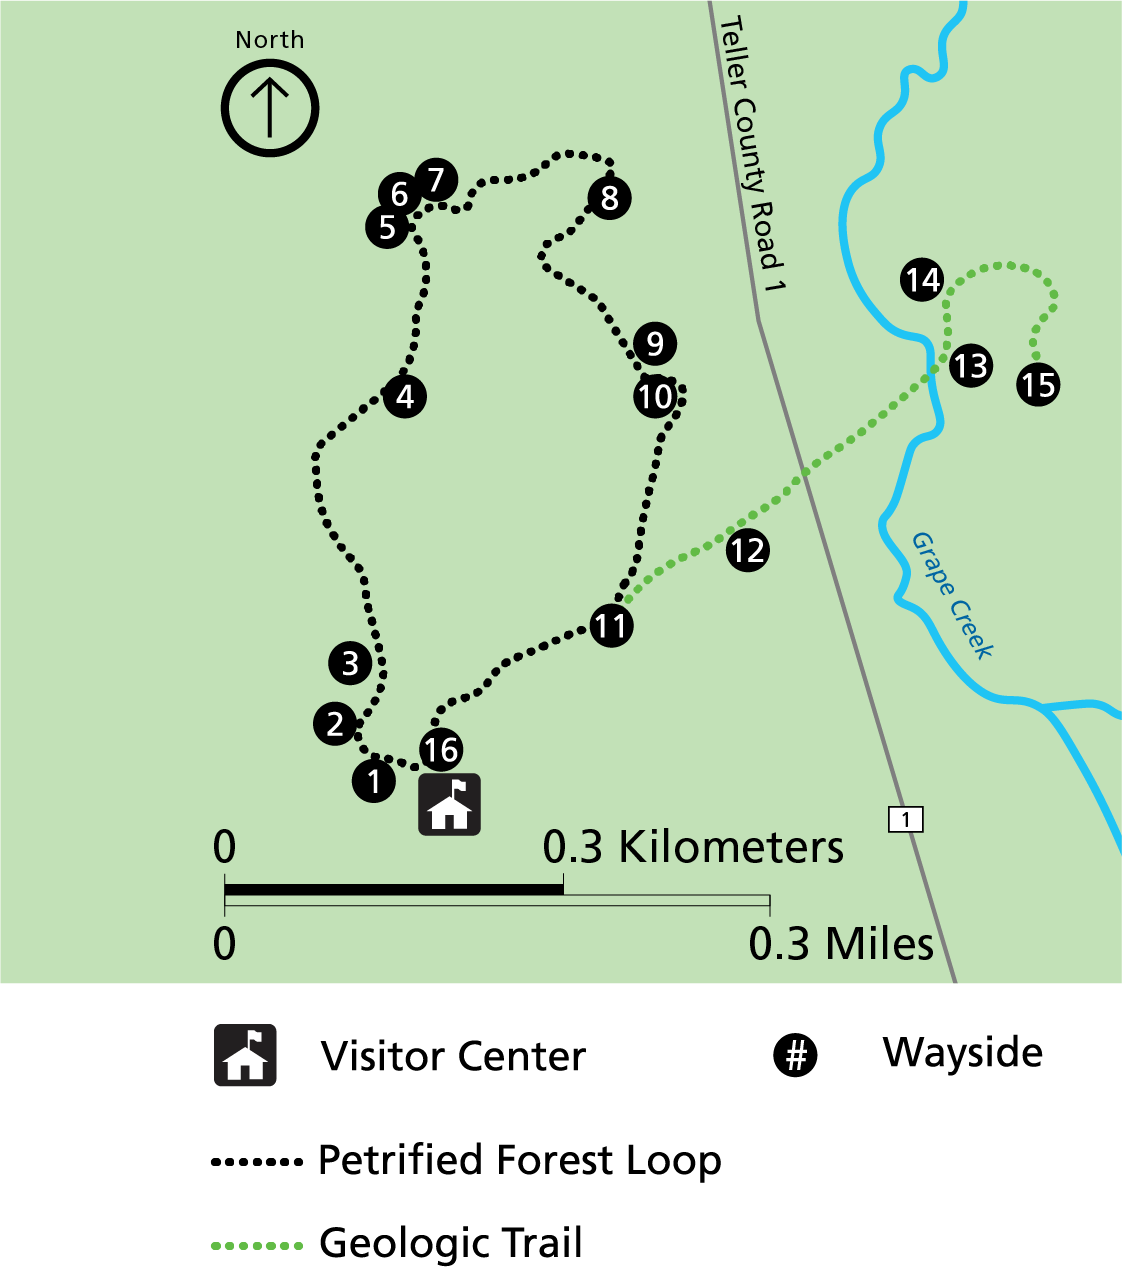 Map of Florissant Fossil Beds with locations of waysides numbered in black dots.